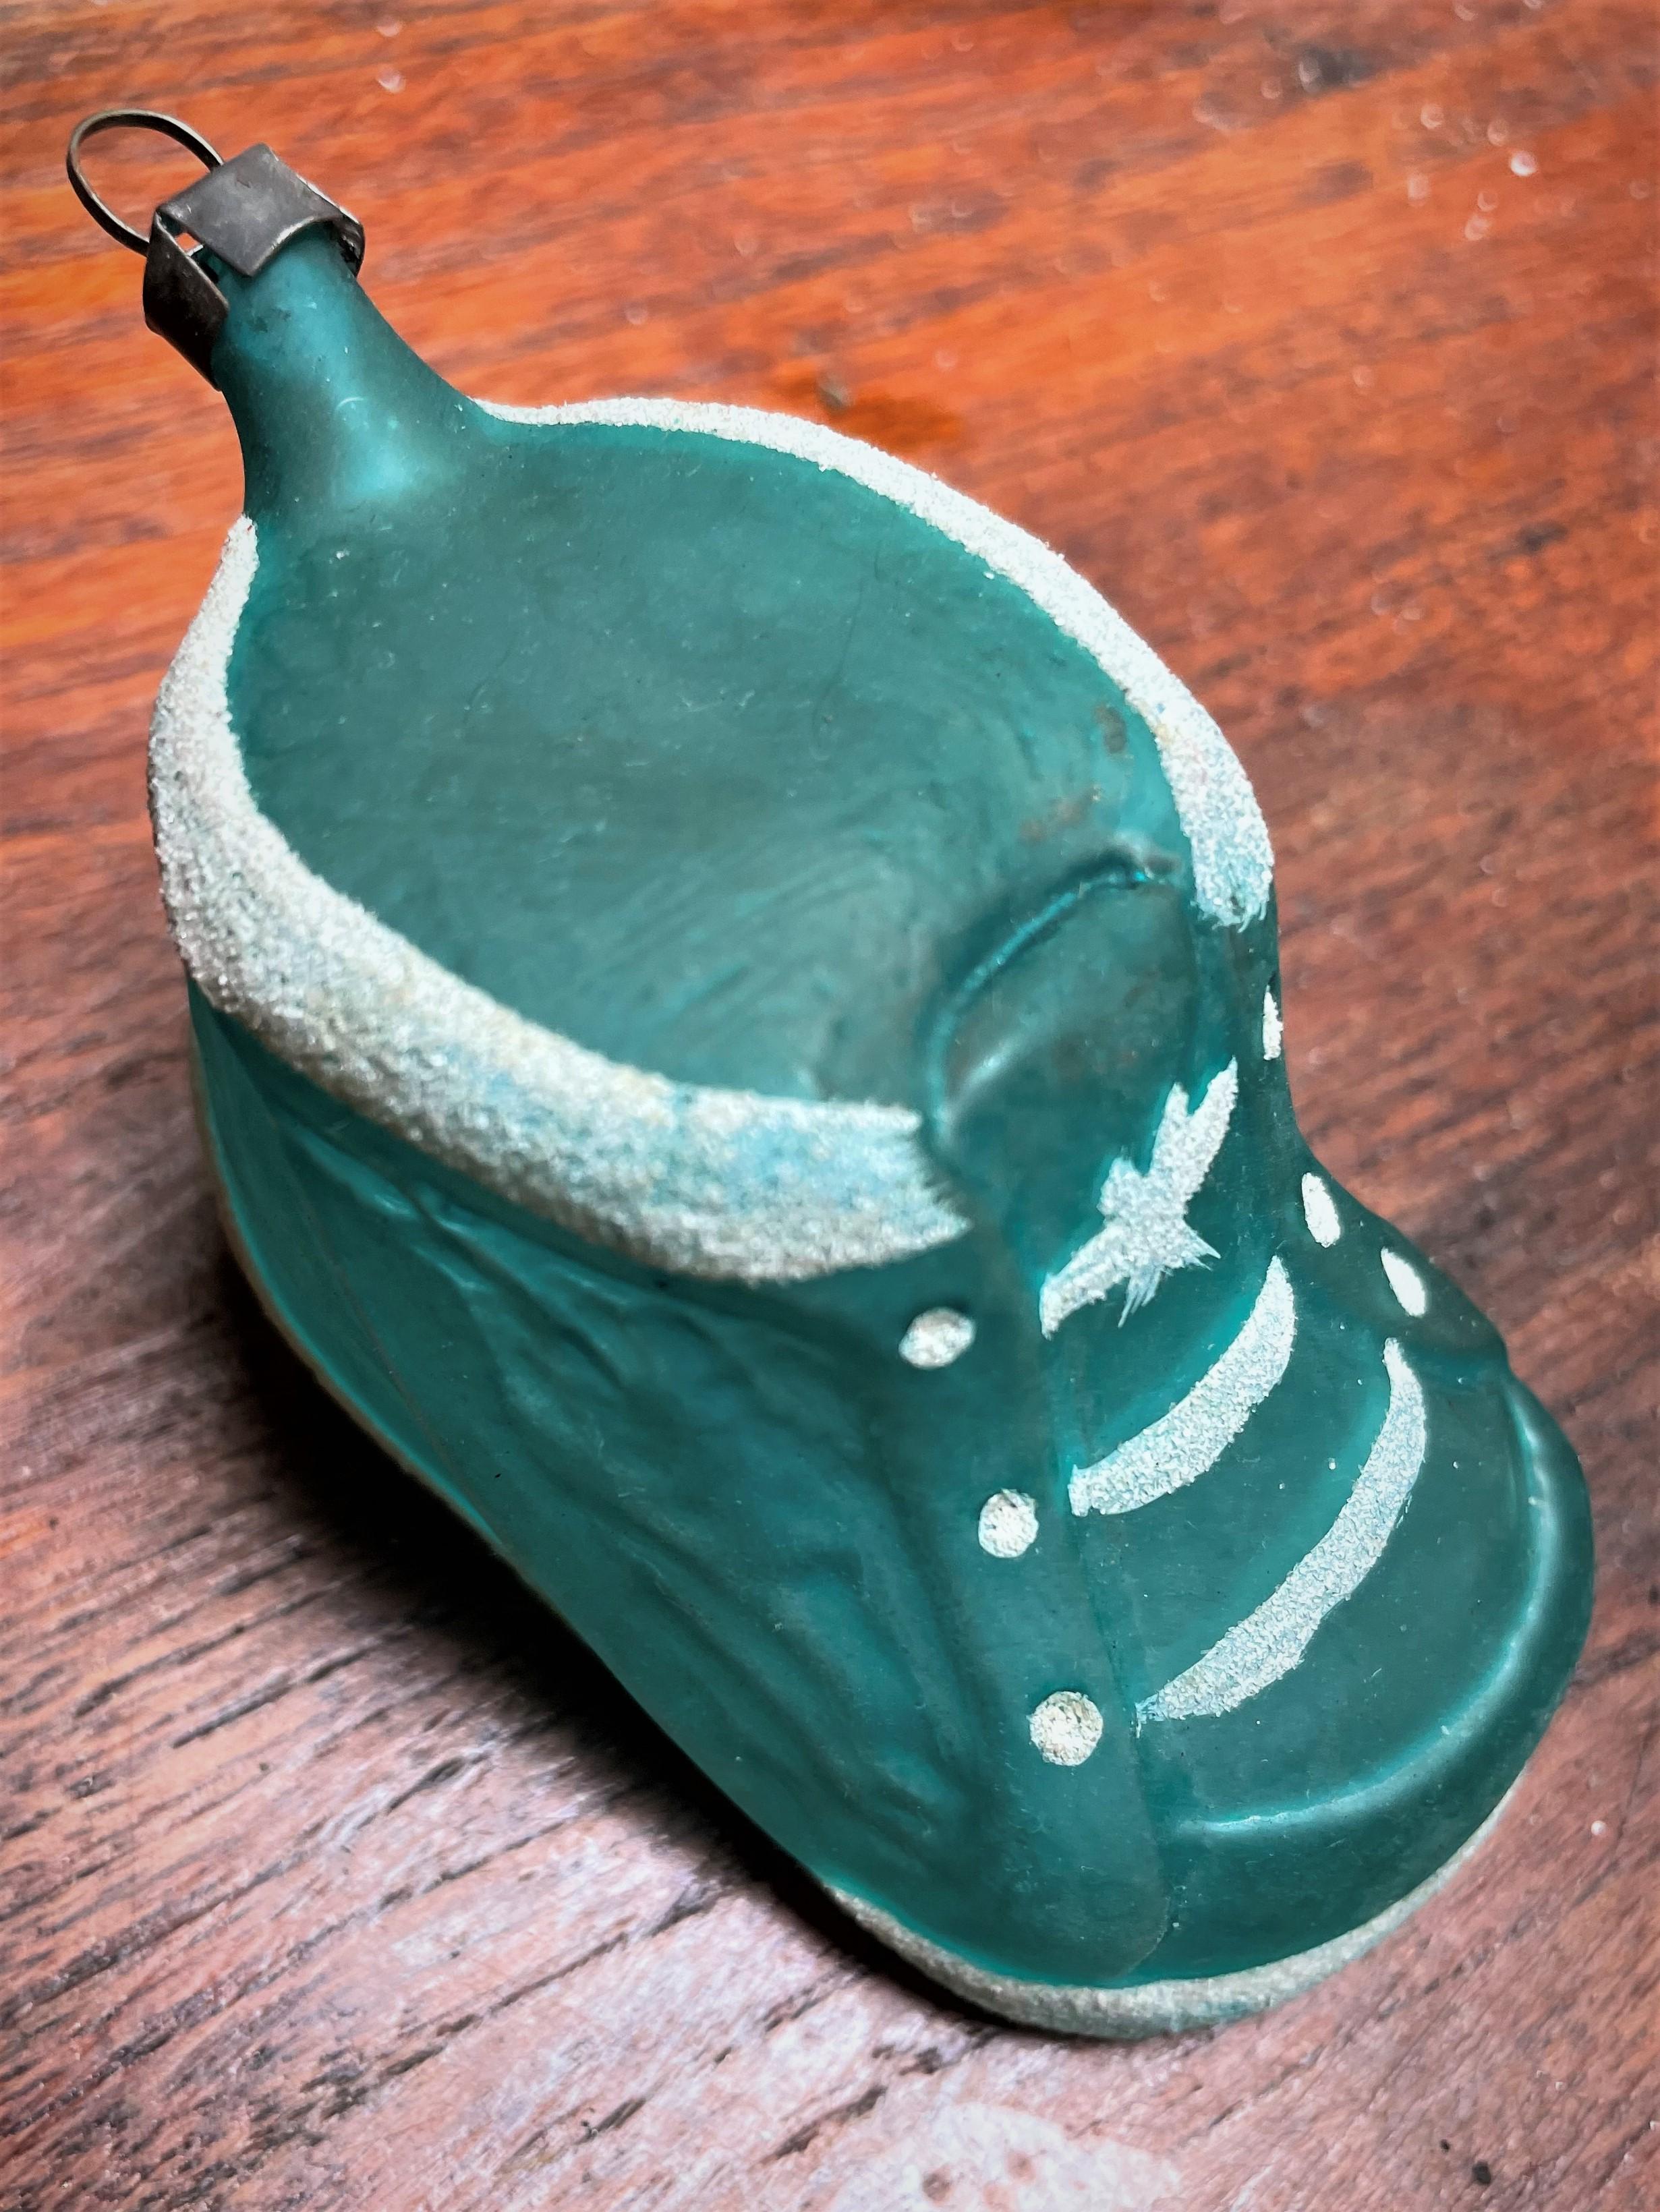 This little blown glass Christmas ornament baby boot is as sweet as can be! It is in good condition and would make a fabulous gift for a baby's first Christmas or would work if you are doing a blue Christmas this year. It is a lovely baby blue color